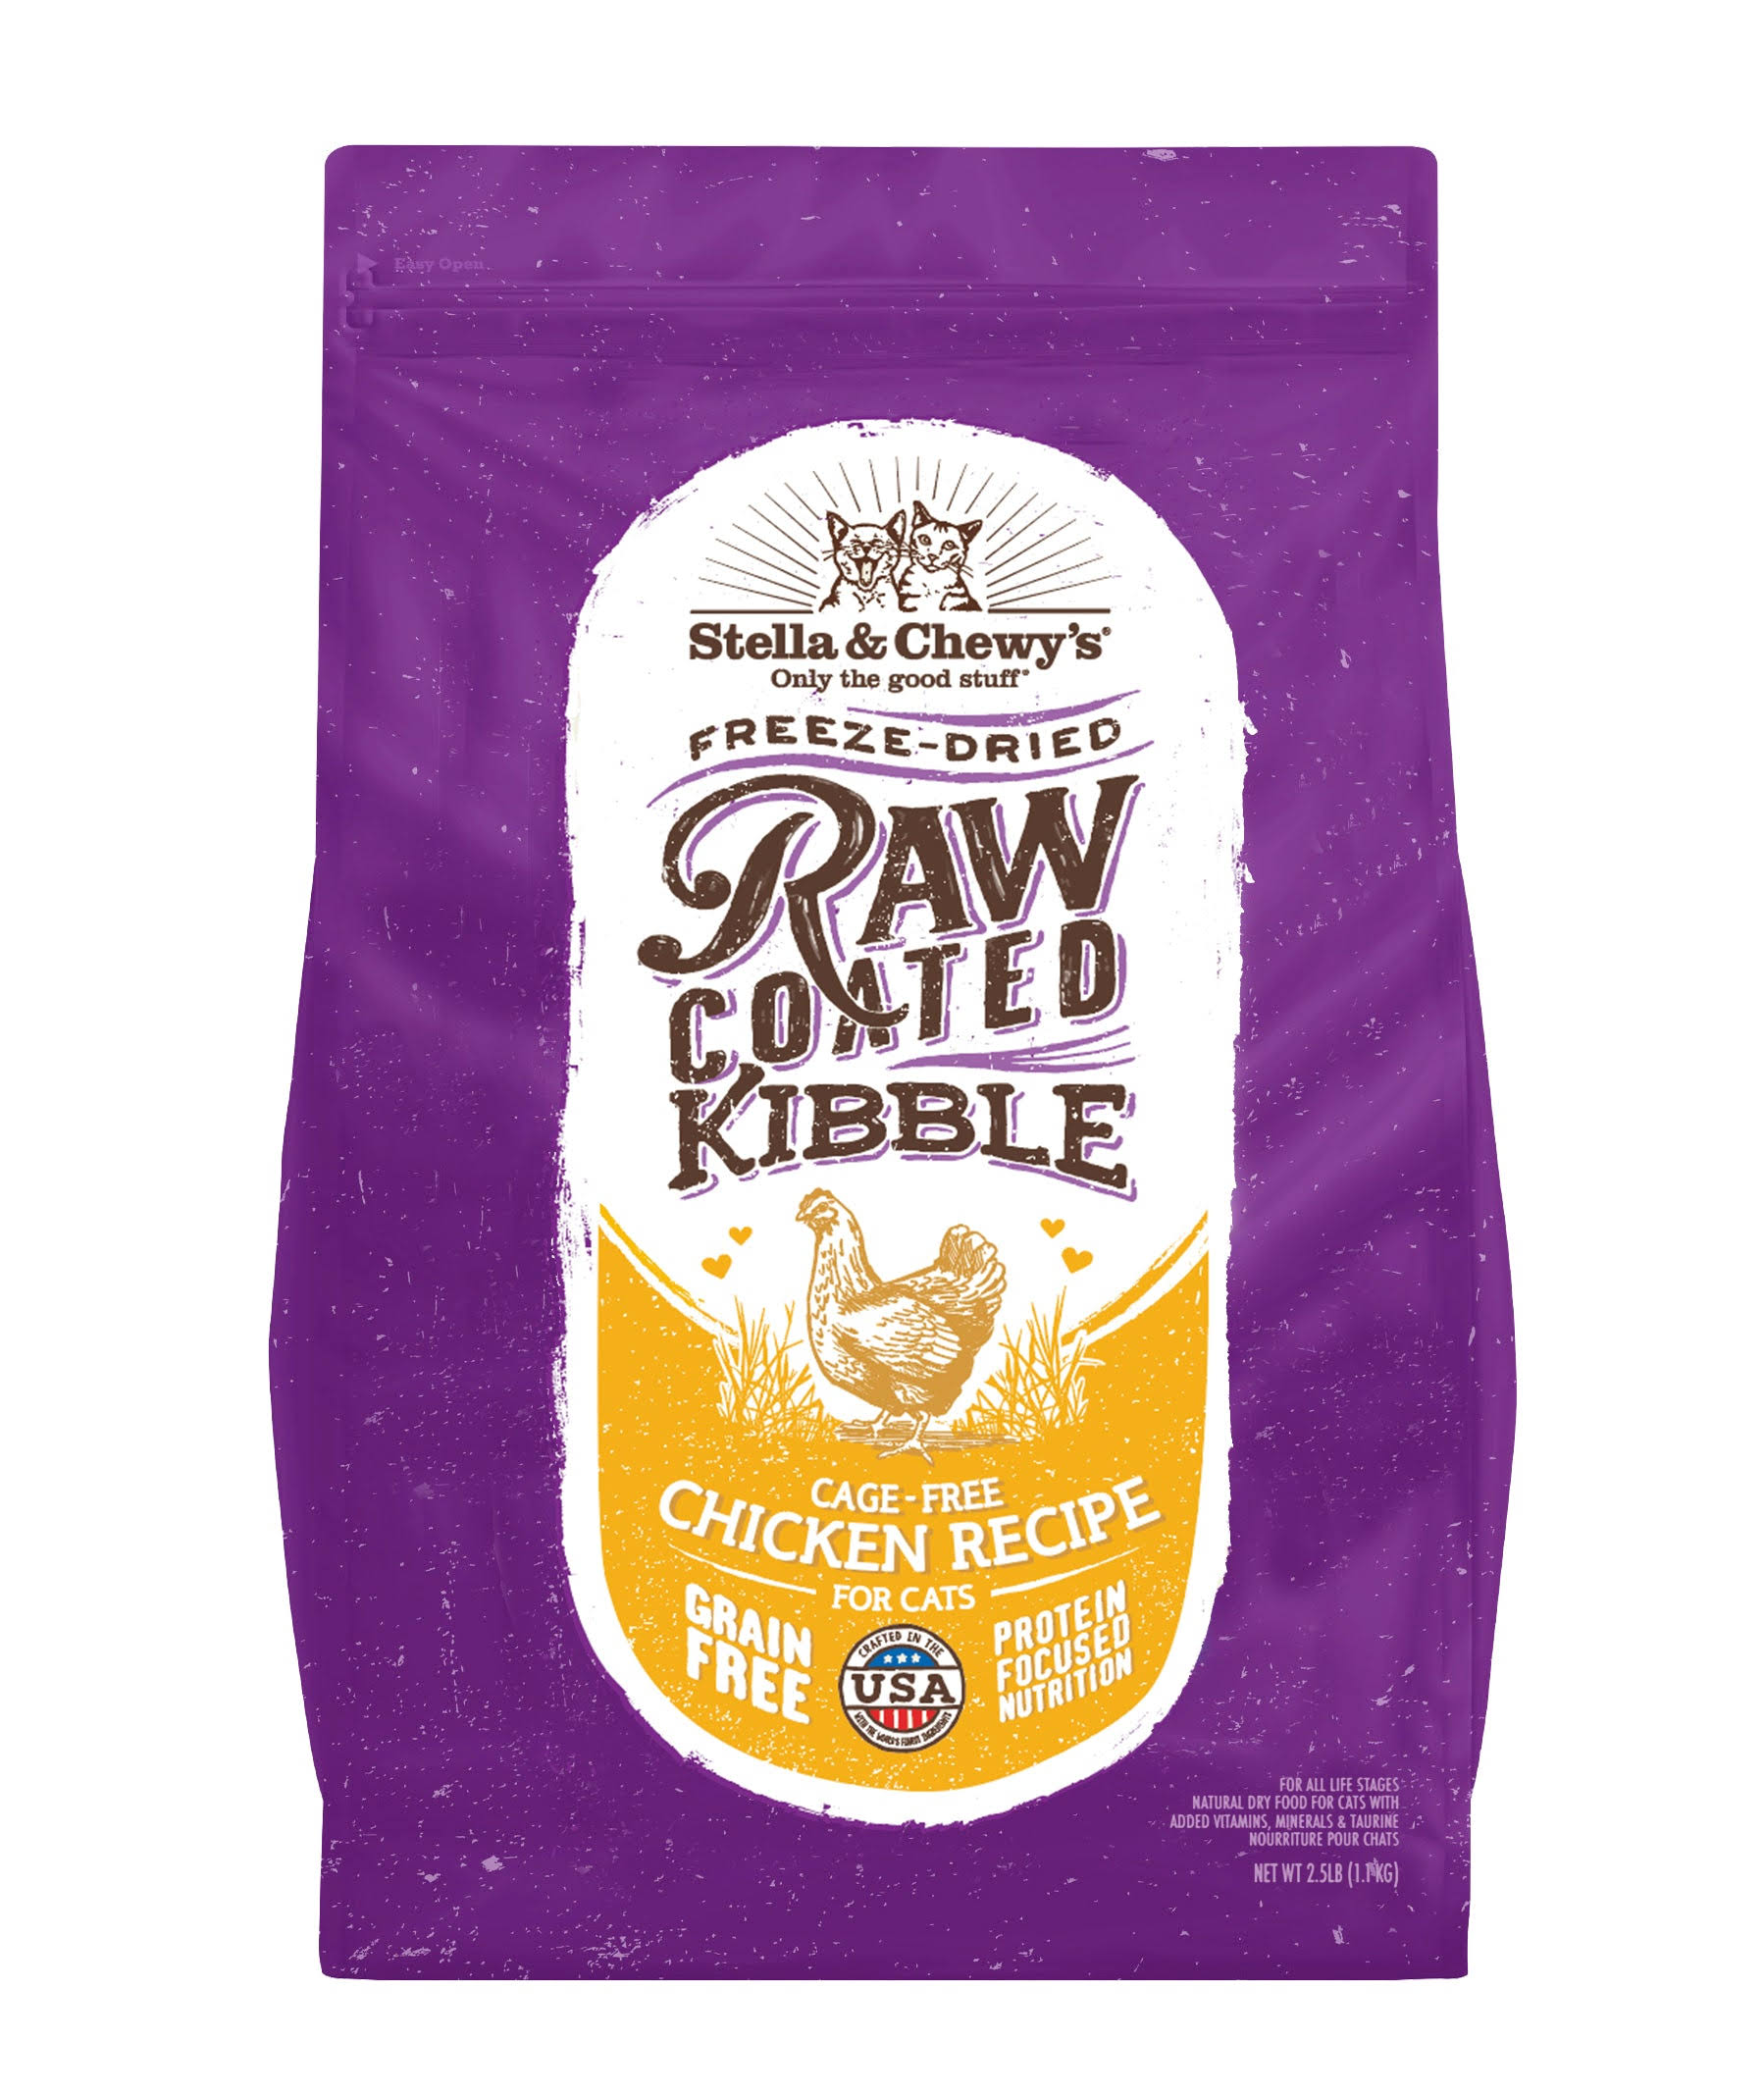 Stella & Chewy's Raw Coated Kibble Cage Free Chicken Recipe Dry Cat Food, 5 lbs